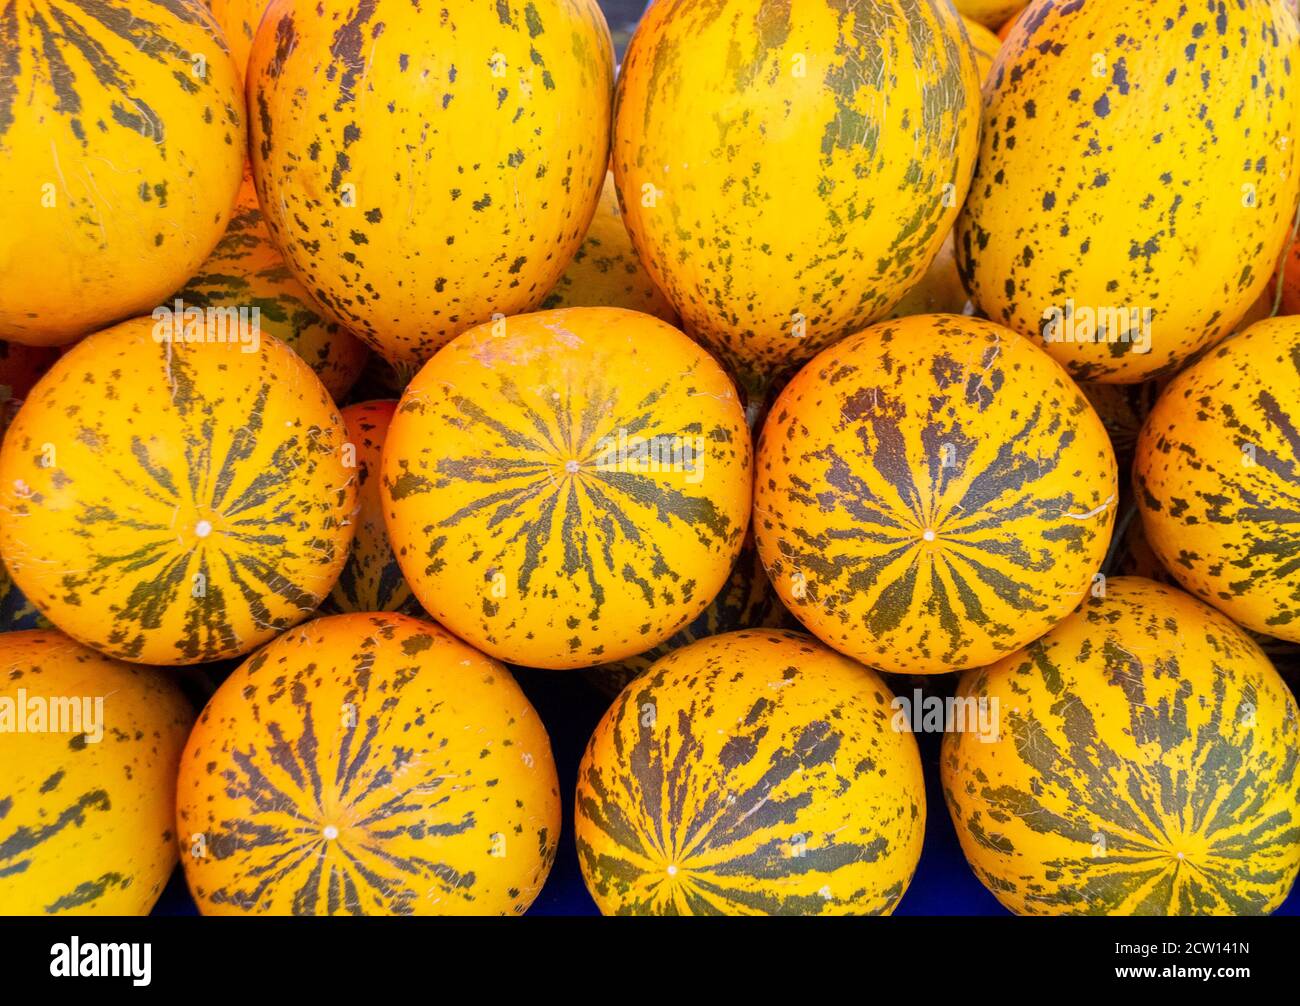 Background from yellow delicious turkish melons at farm market Stock Photo